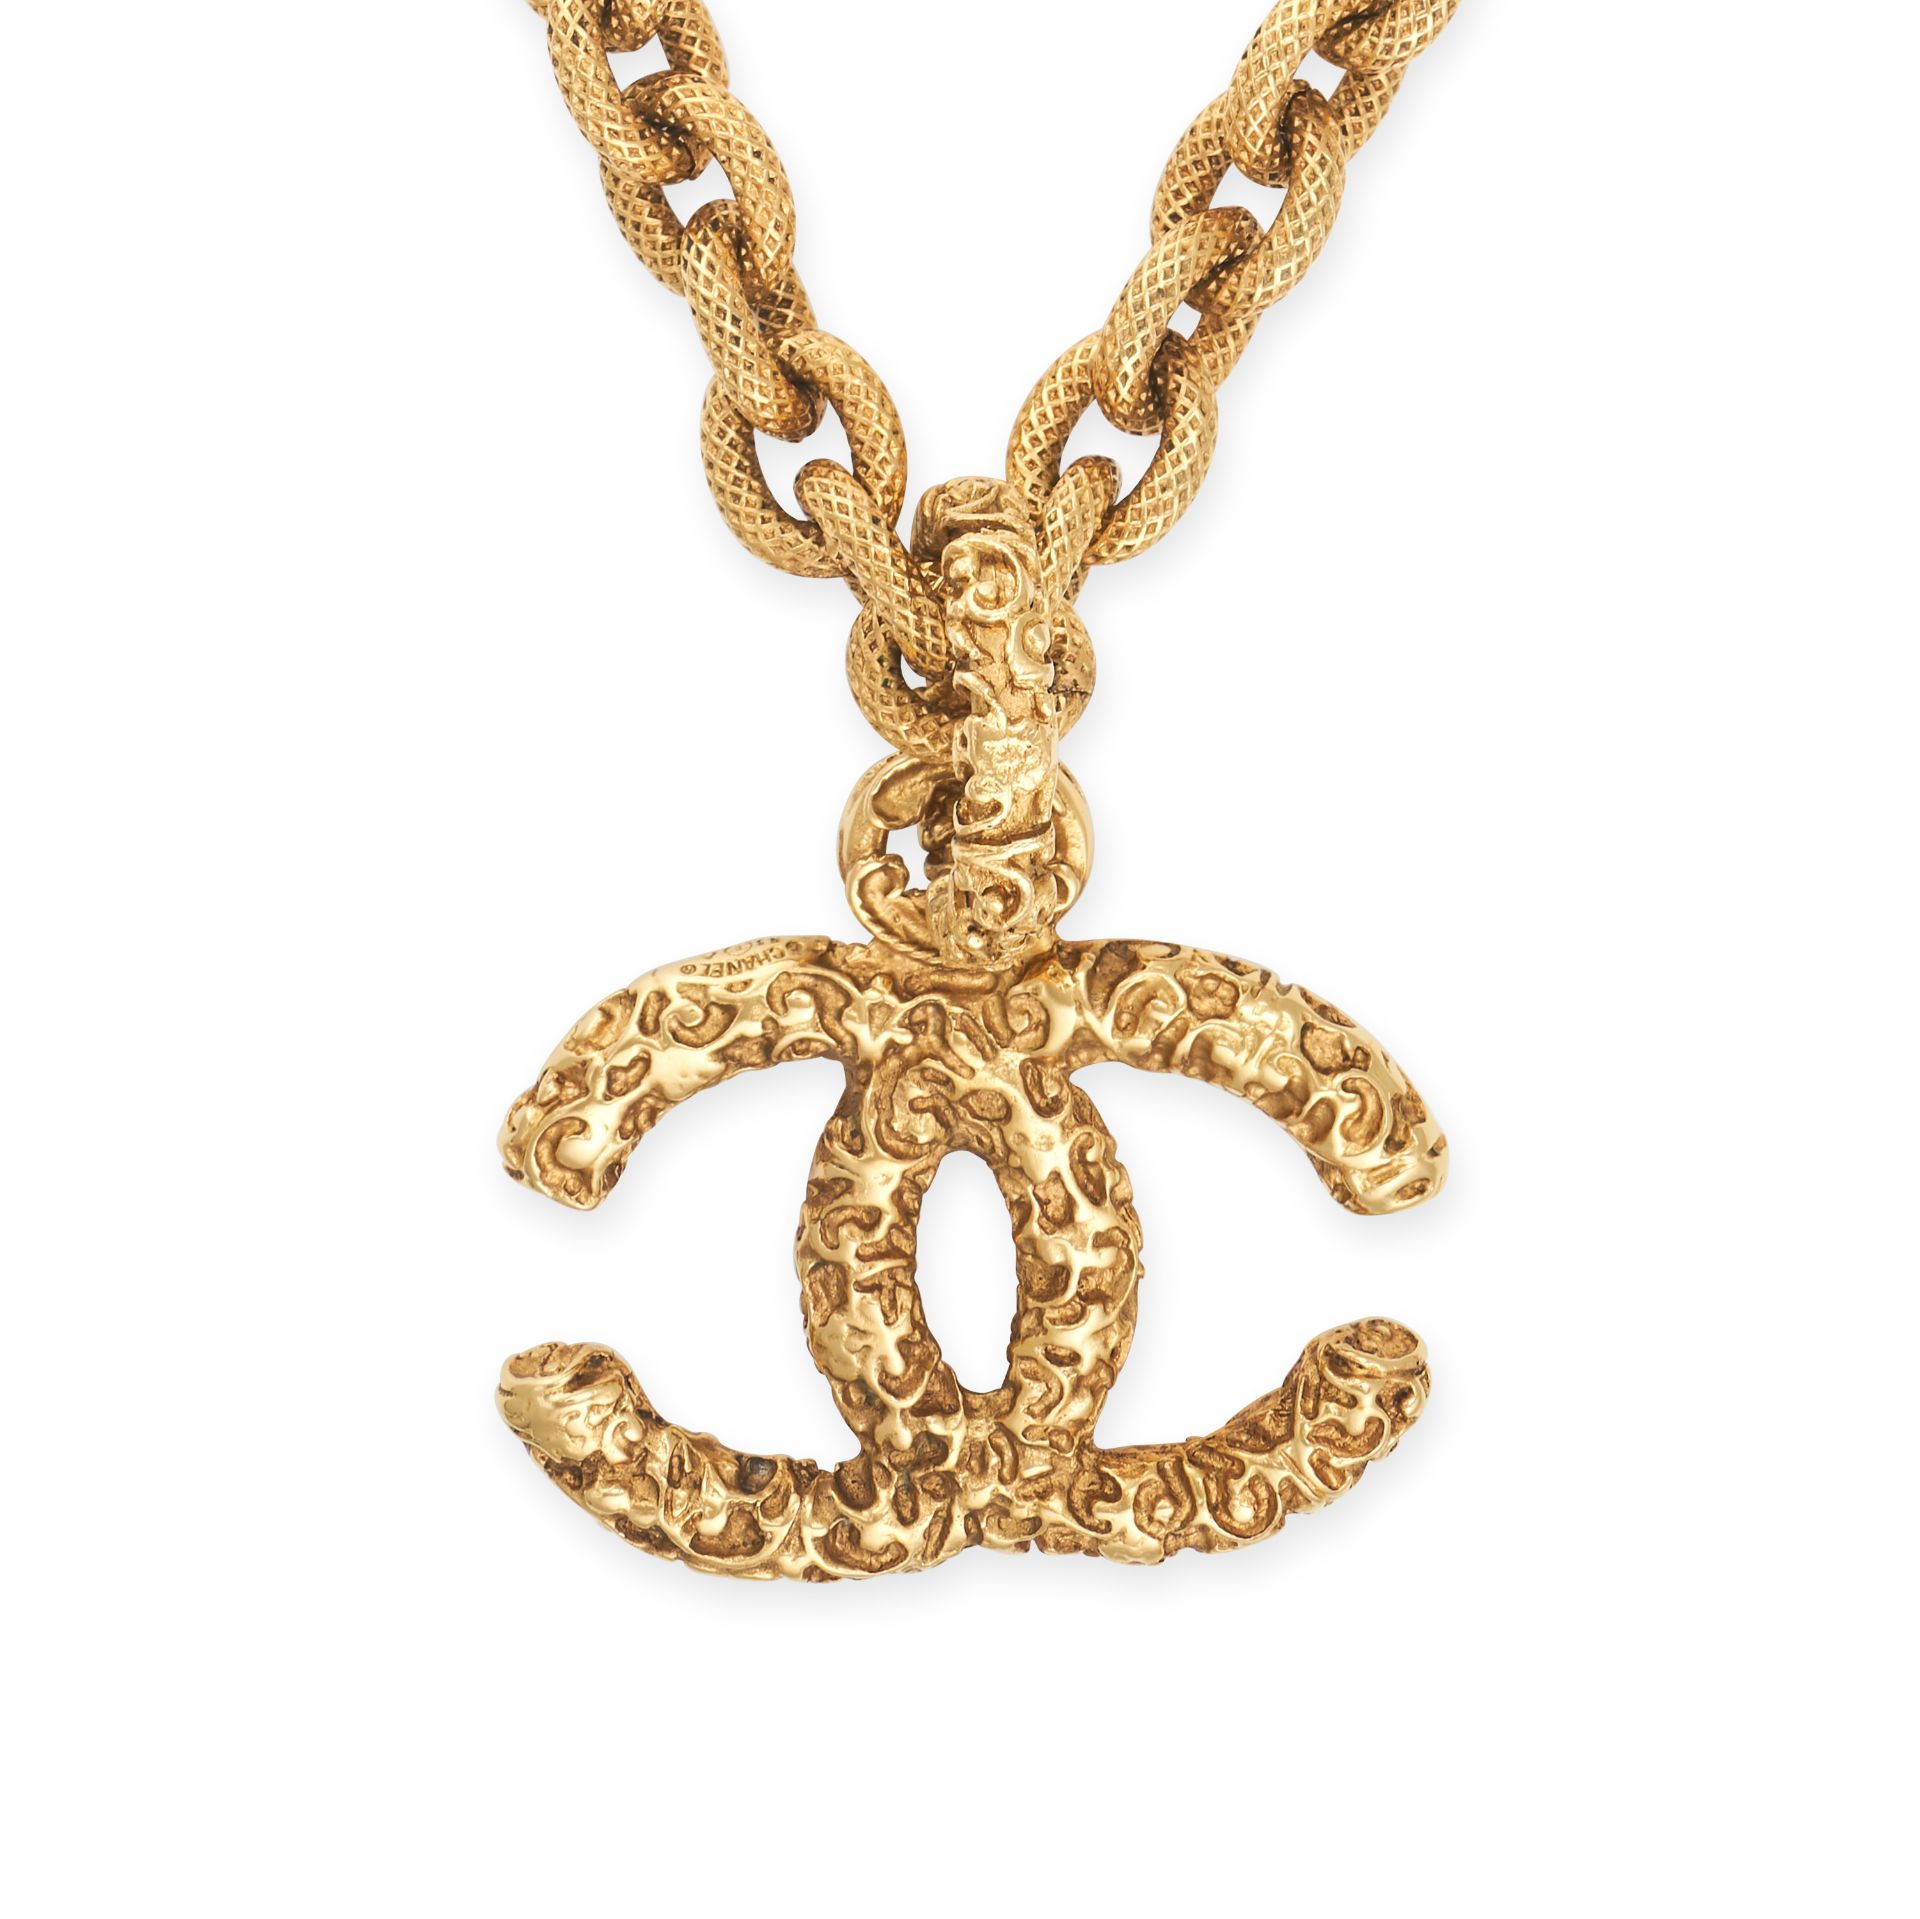 CHANEL VINTAGE PENDANT AND CHAIN - Image 2 of 2